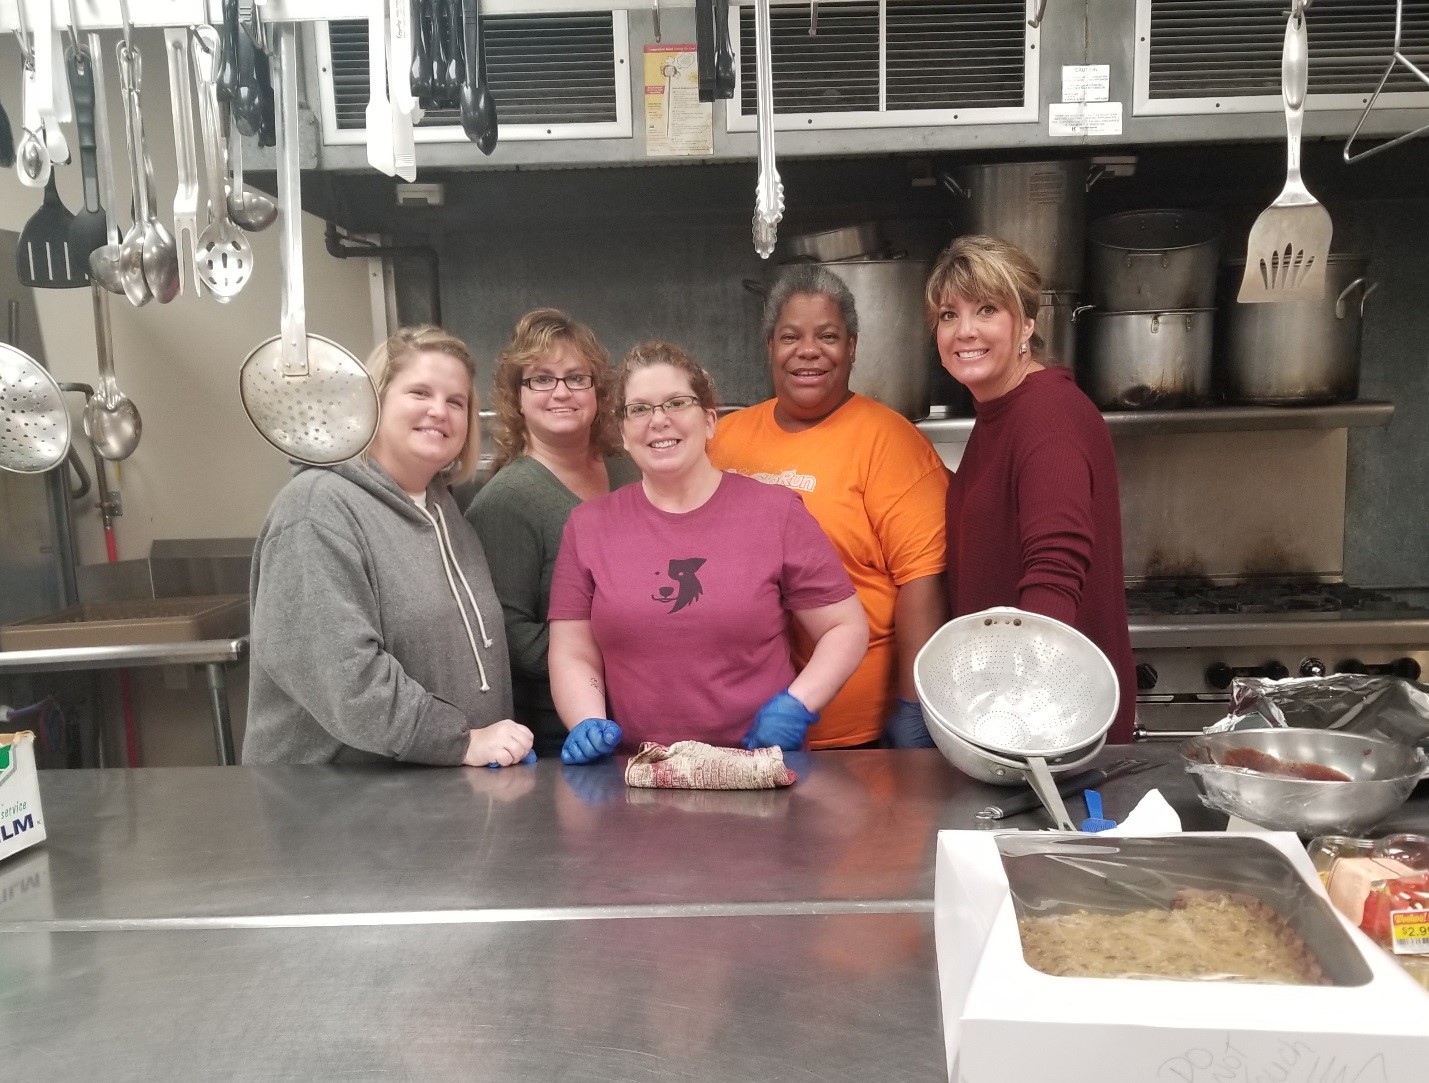 Pictured from left to right are KHC staff volunteers: Sara, Jennifer, Deanna, Reida, and Charla.